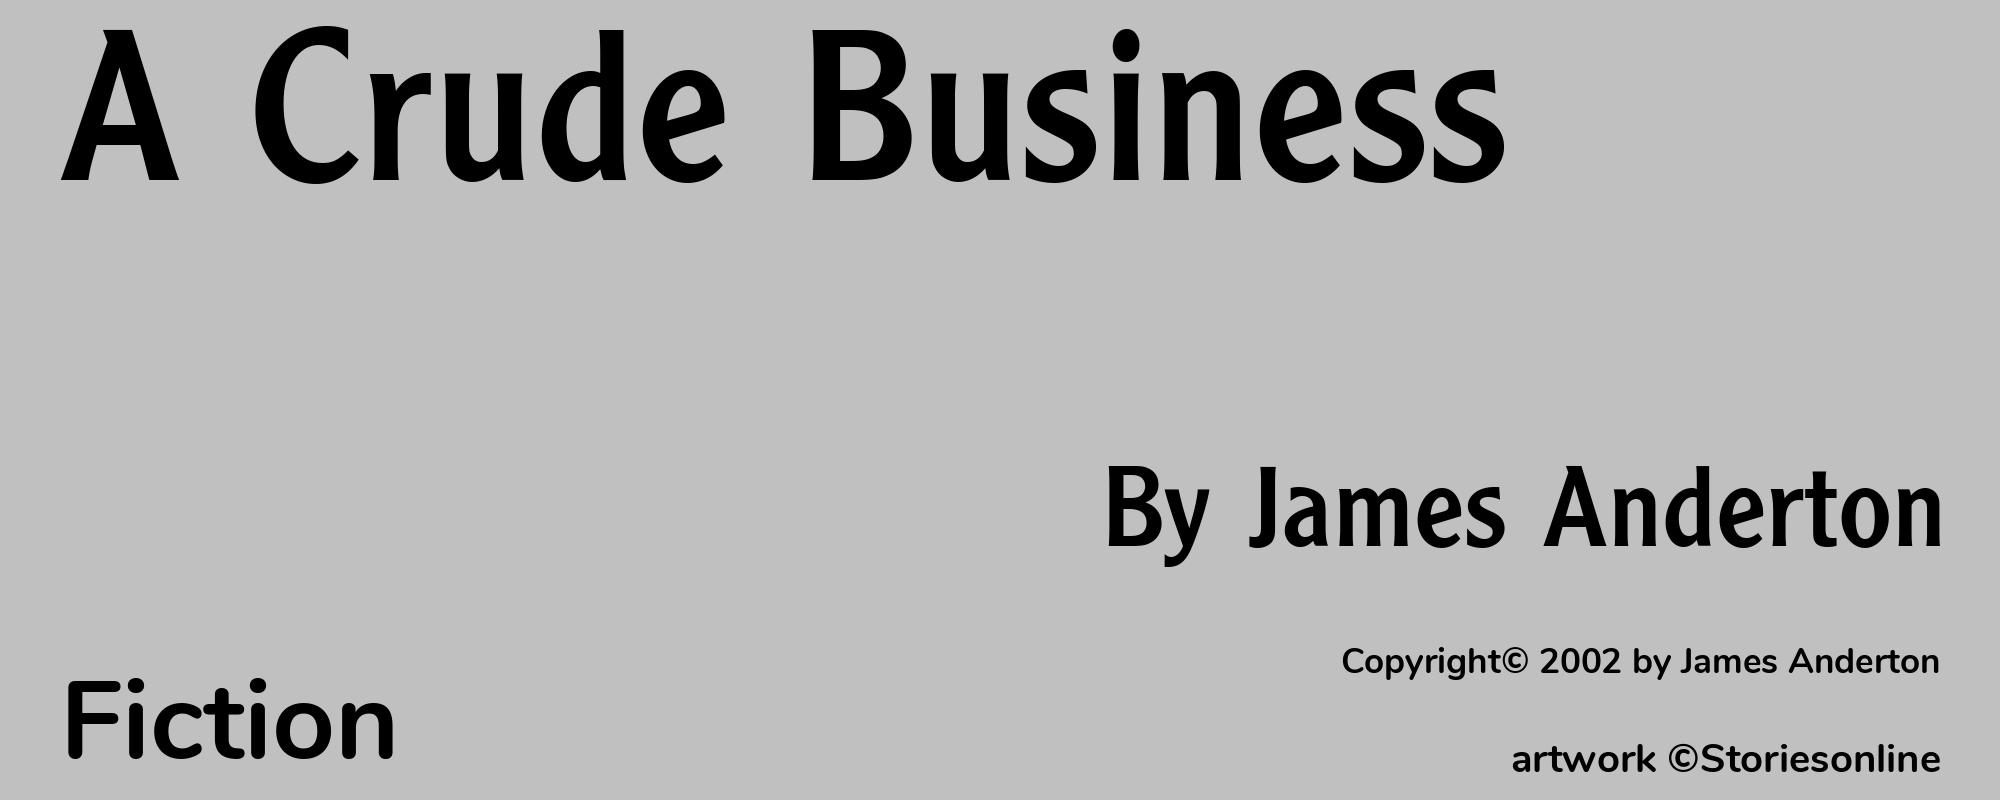 A Crude Business - Cover